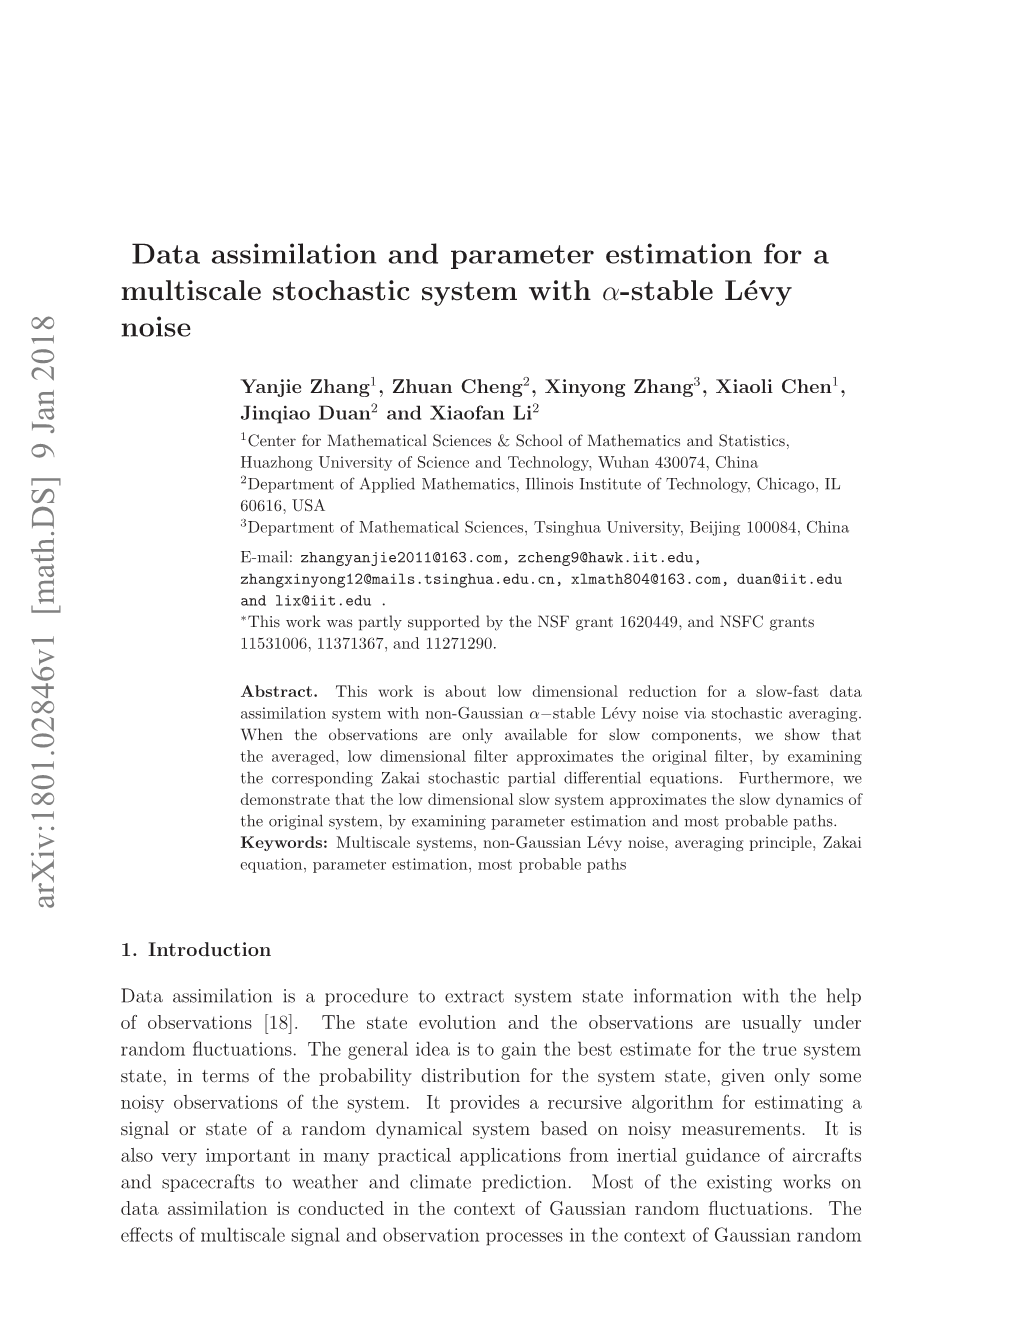 Data Assimilation and Parameter Estimation for a Multiscale Stochastic System with Α-Stable Lévy Noise